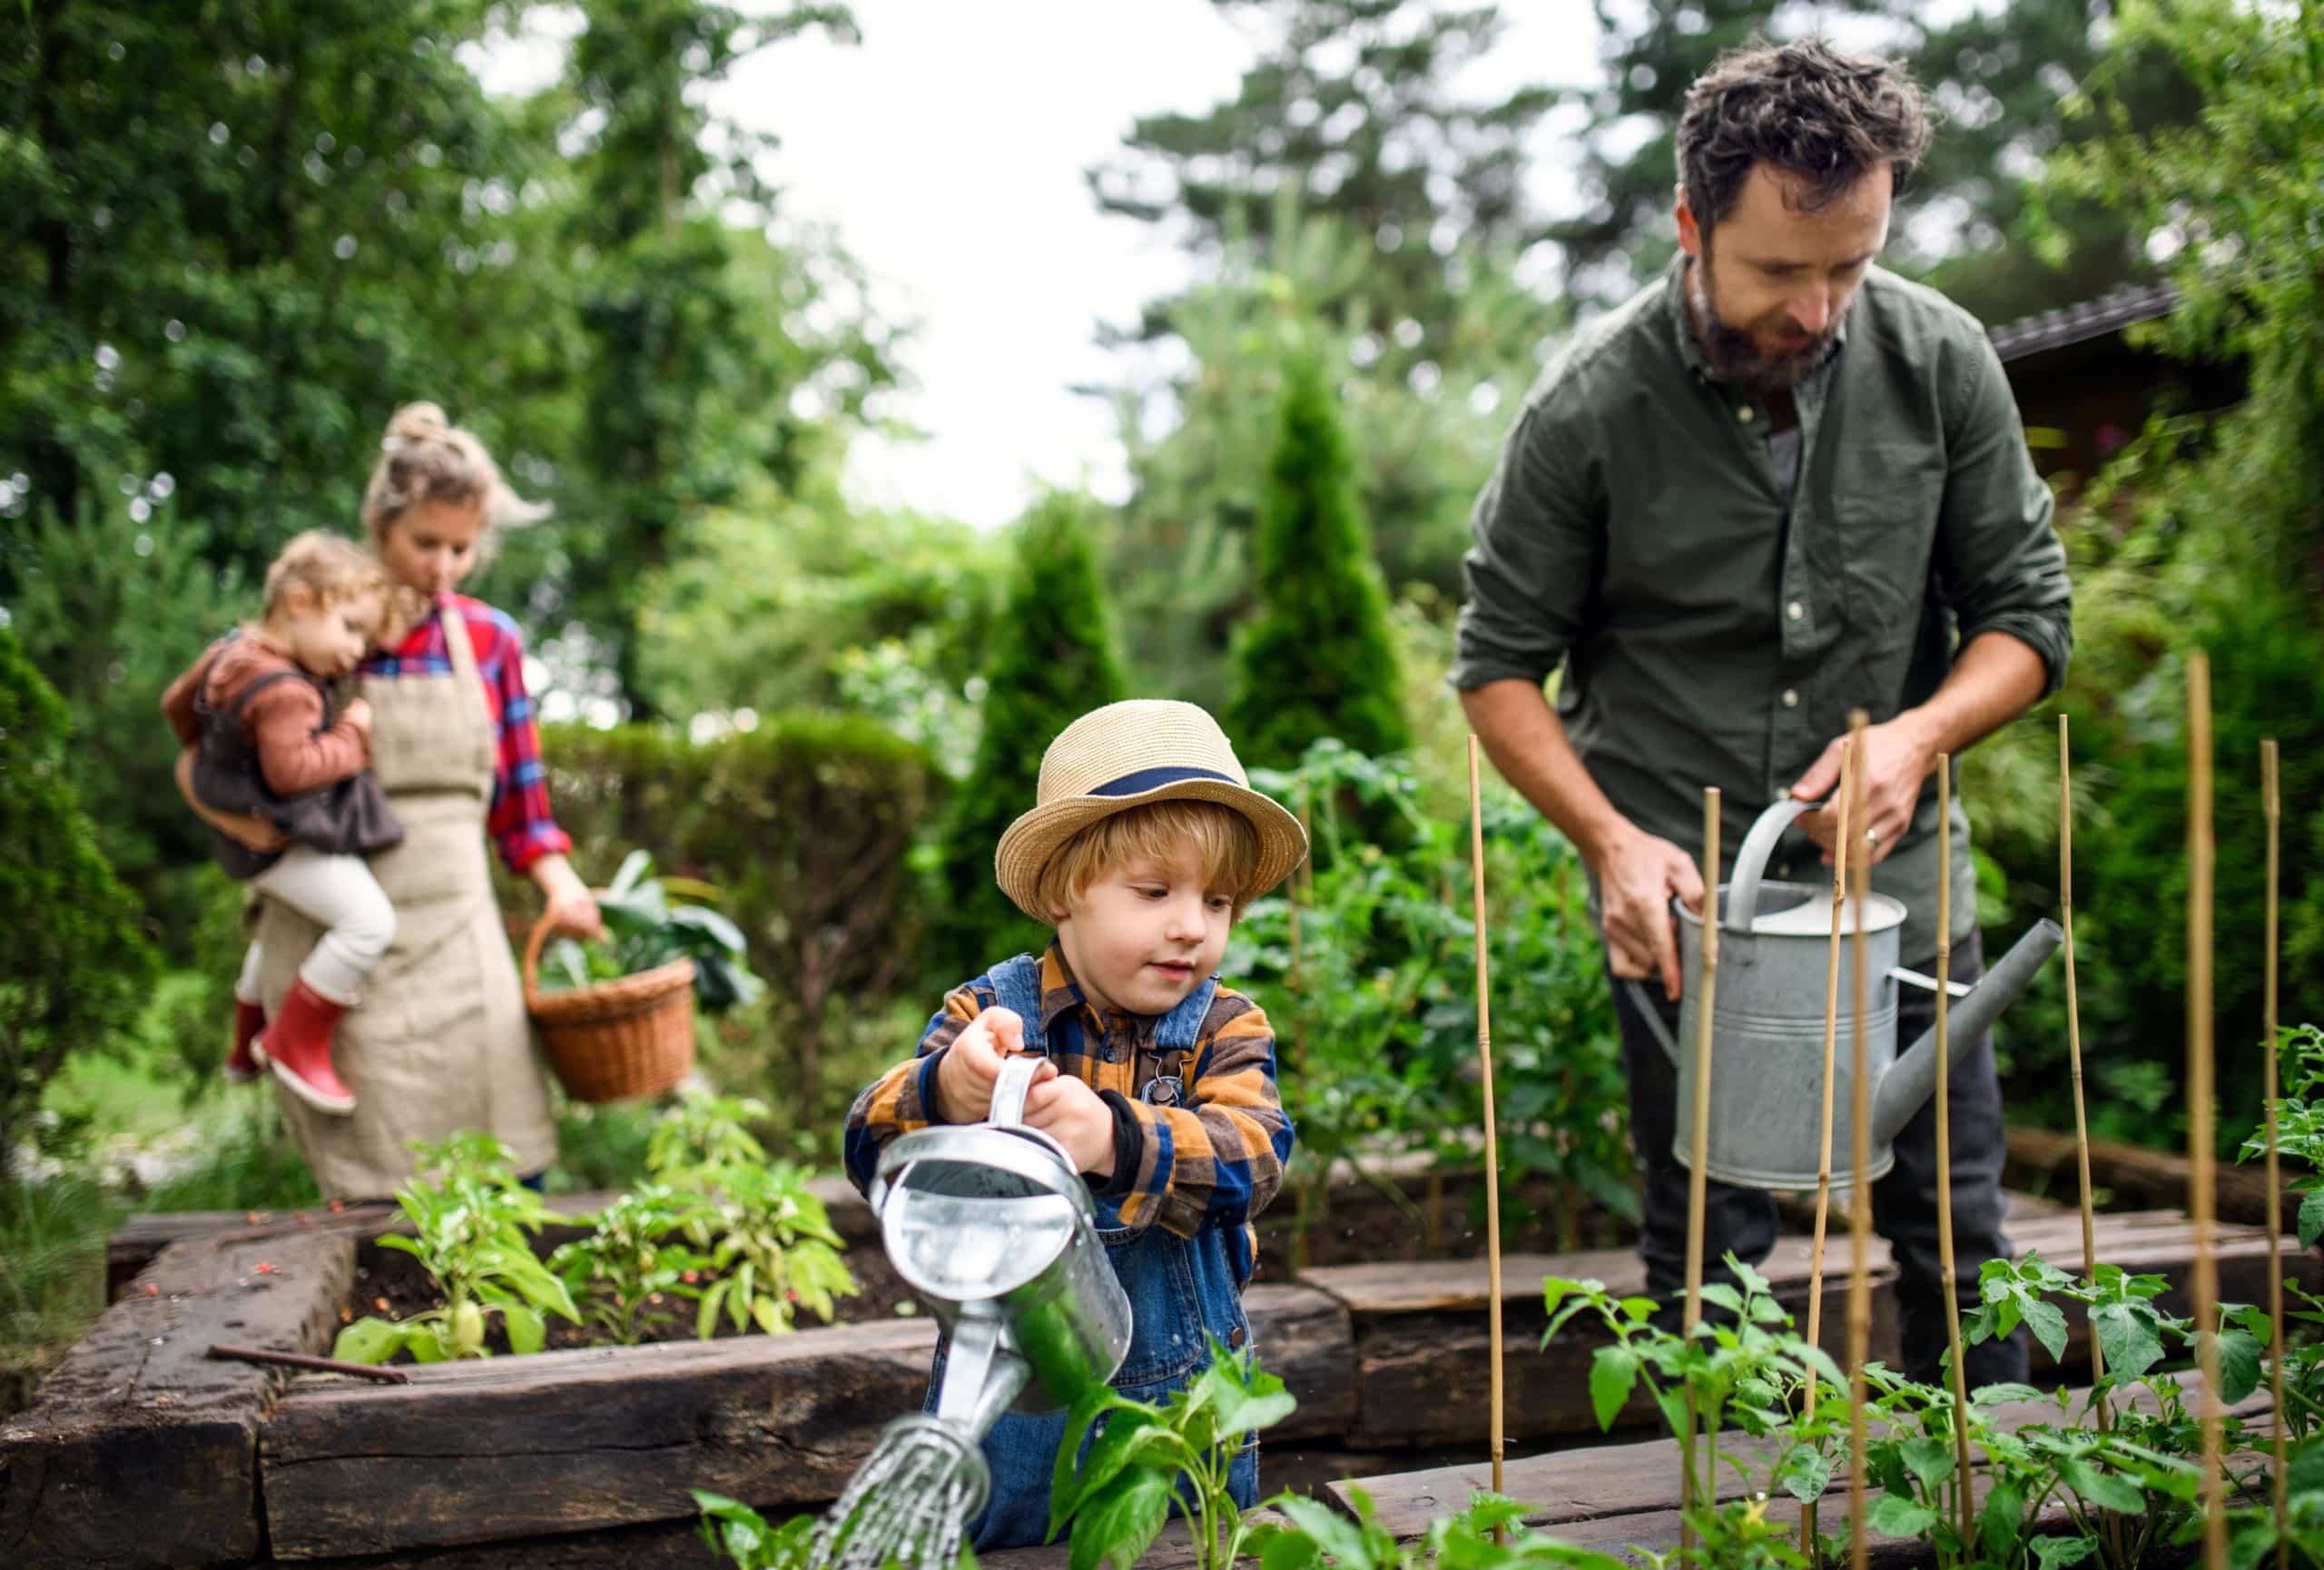 A family working together in a community garden is one example of community engagement